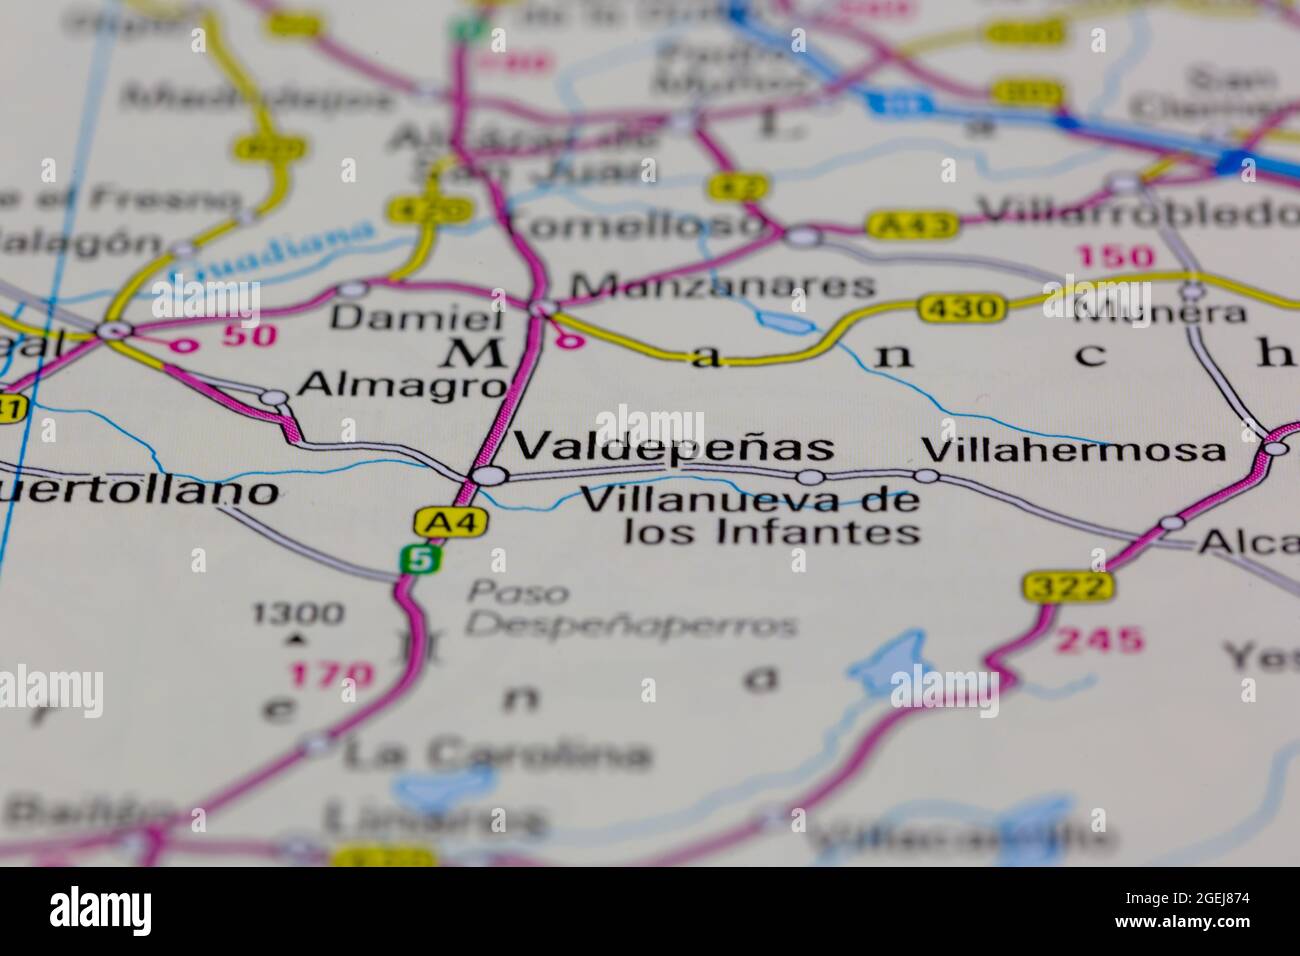 Valdepenas Spain shown on a road map or Geography map Stock Photo